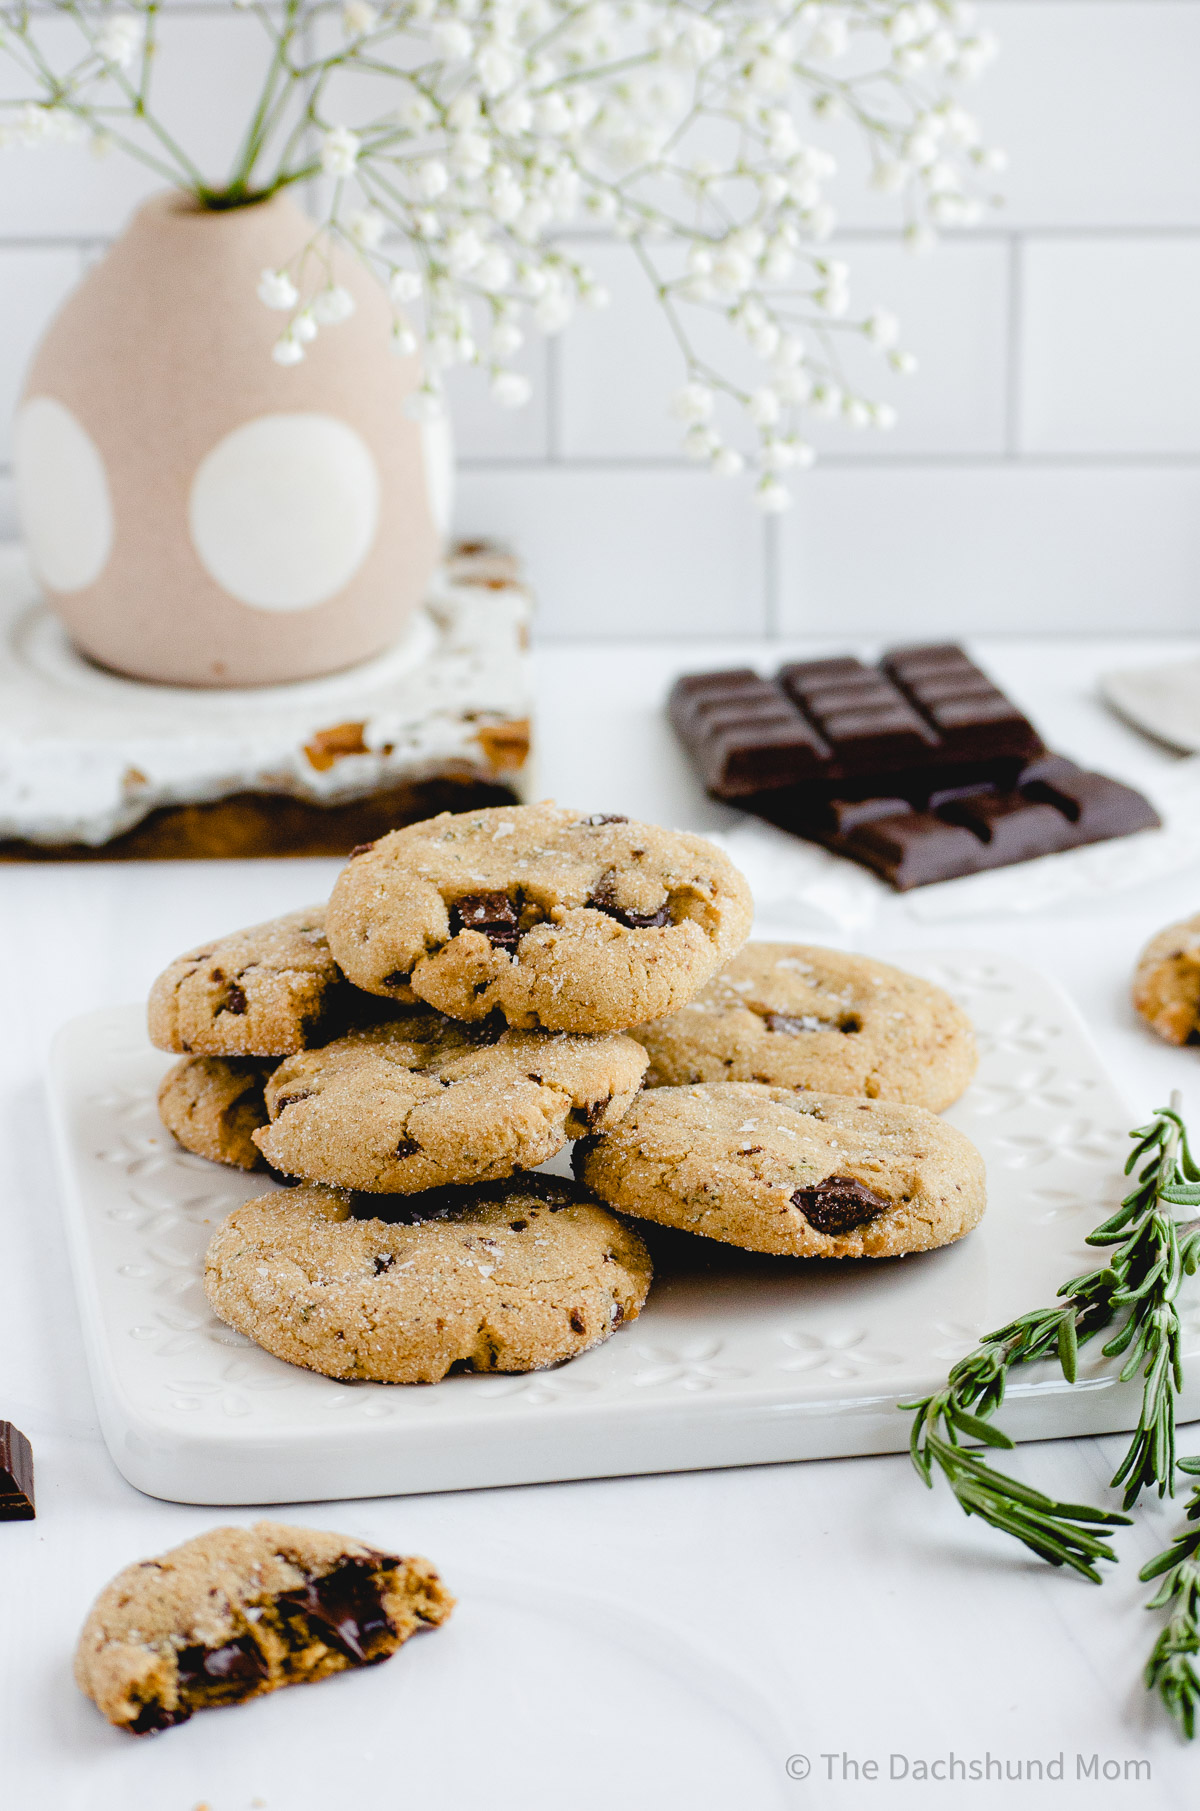 A plate of cookies with dark chocolate chips and fresh rosemary.